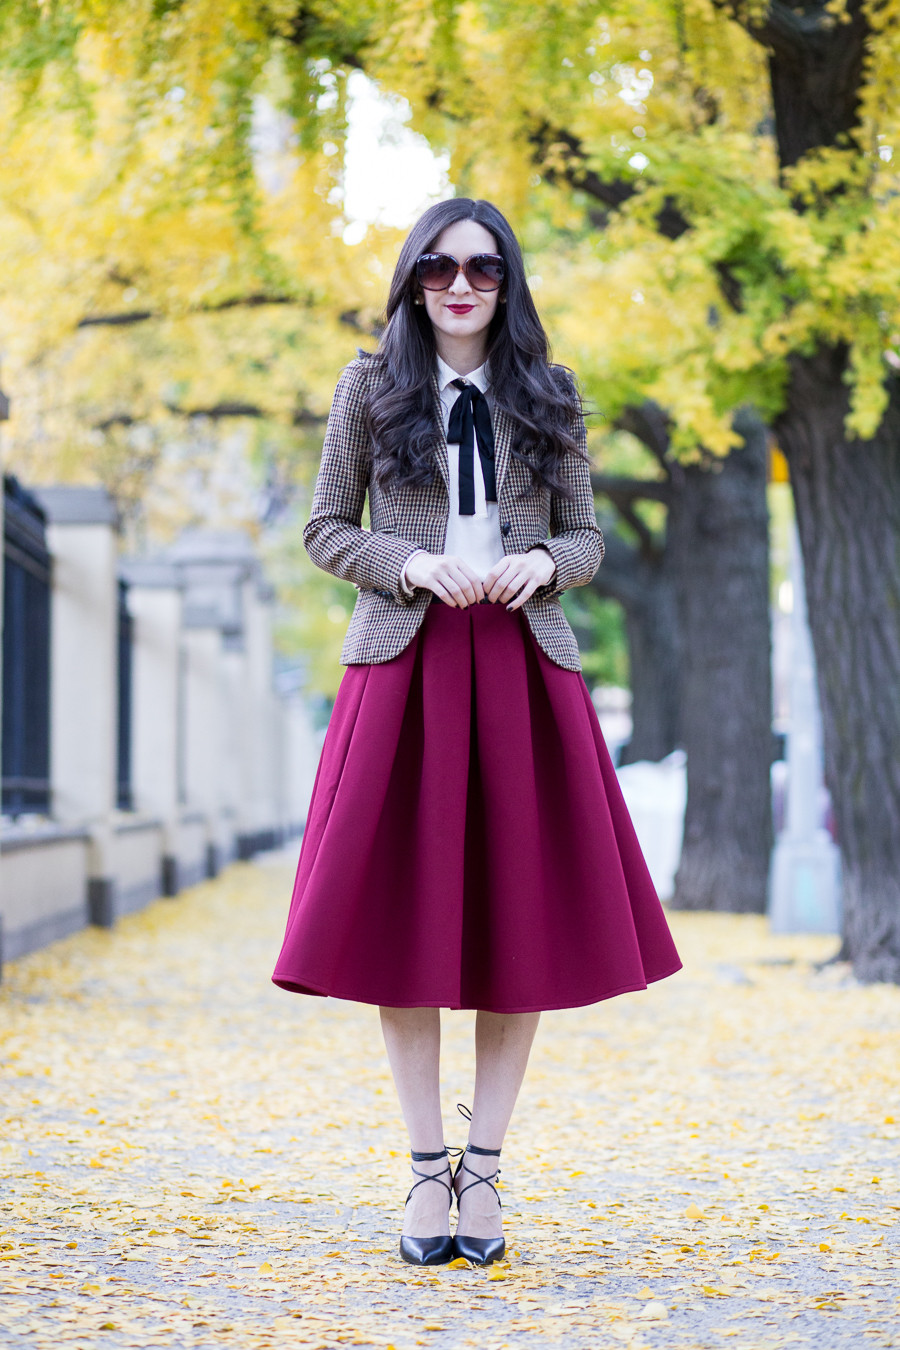 J.Crew Collection Jeweled-Collar Schoolboy Blazer, J.Crew Schoolboy Blazer, J.Crew Houndstooth Blazer, J.Crew Collection Blazer, Asos Full Skirt, Asos Midi Skirt, Asos Full Midi Skirt, Asos Burgundy Midi Skirt, Asos Premium Full Midi Skirt in Bonded Crepe, Steve Madden Lace Up Heels, Steve Madden Raela Heels in Black Leather, Steve Madden Black Leather Lace Up Heels, Fall Outfit, Work Outfit, Winter Outfit, H&M Crepe Blouse with Bow